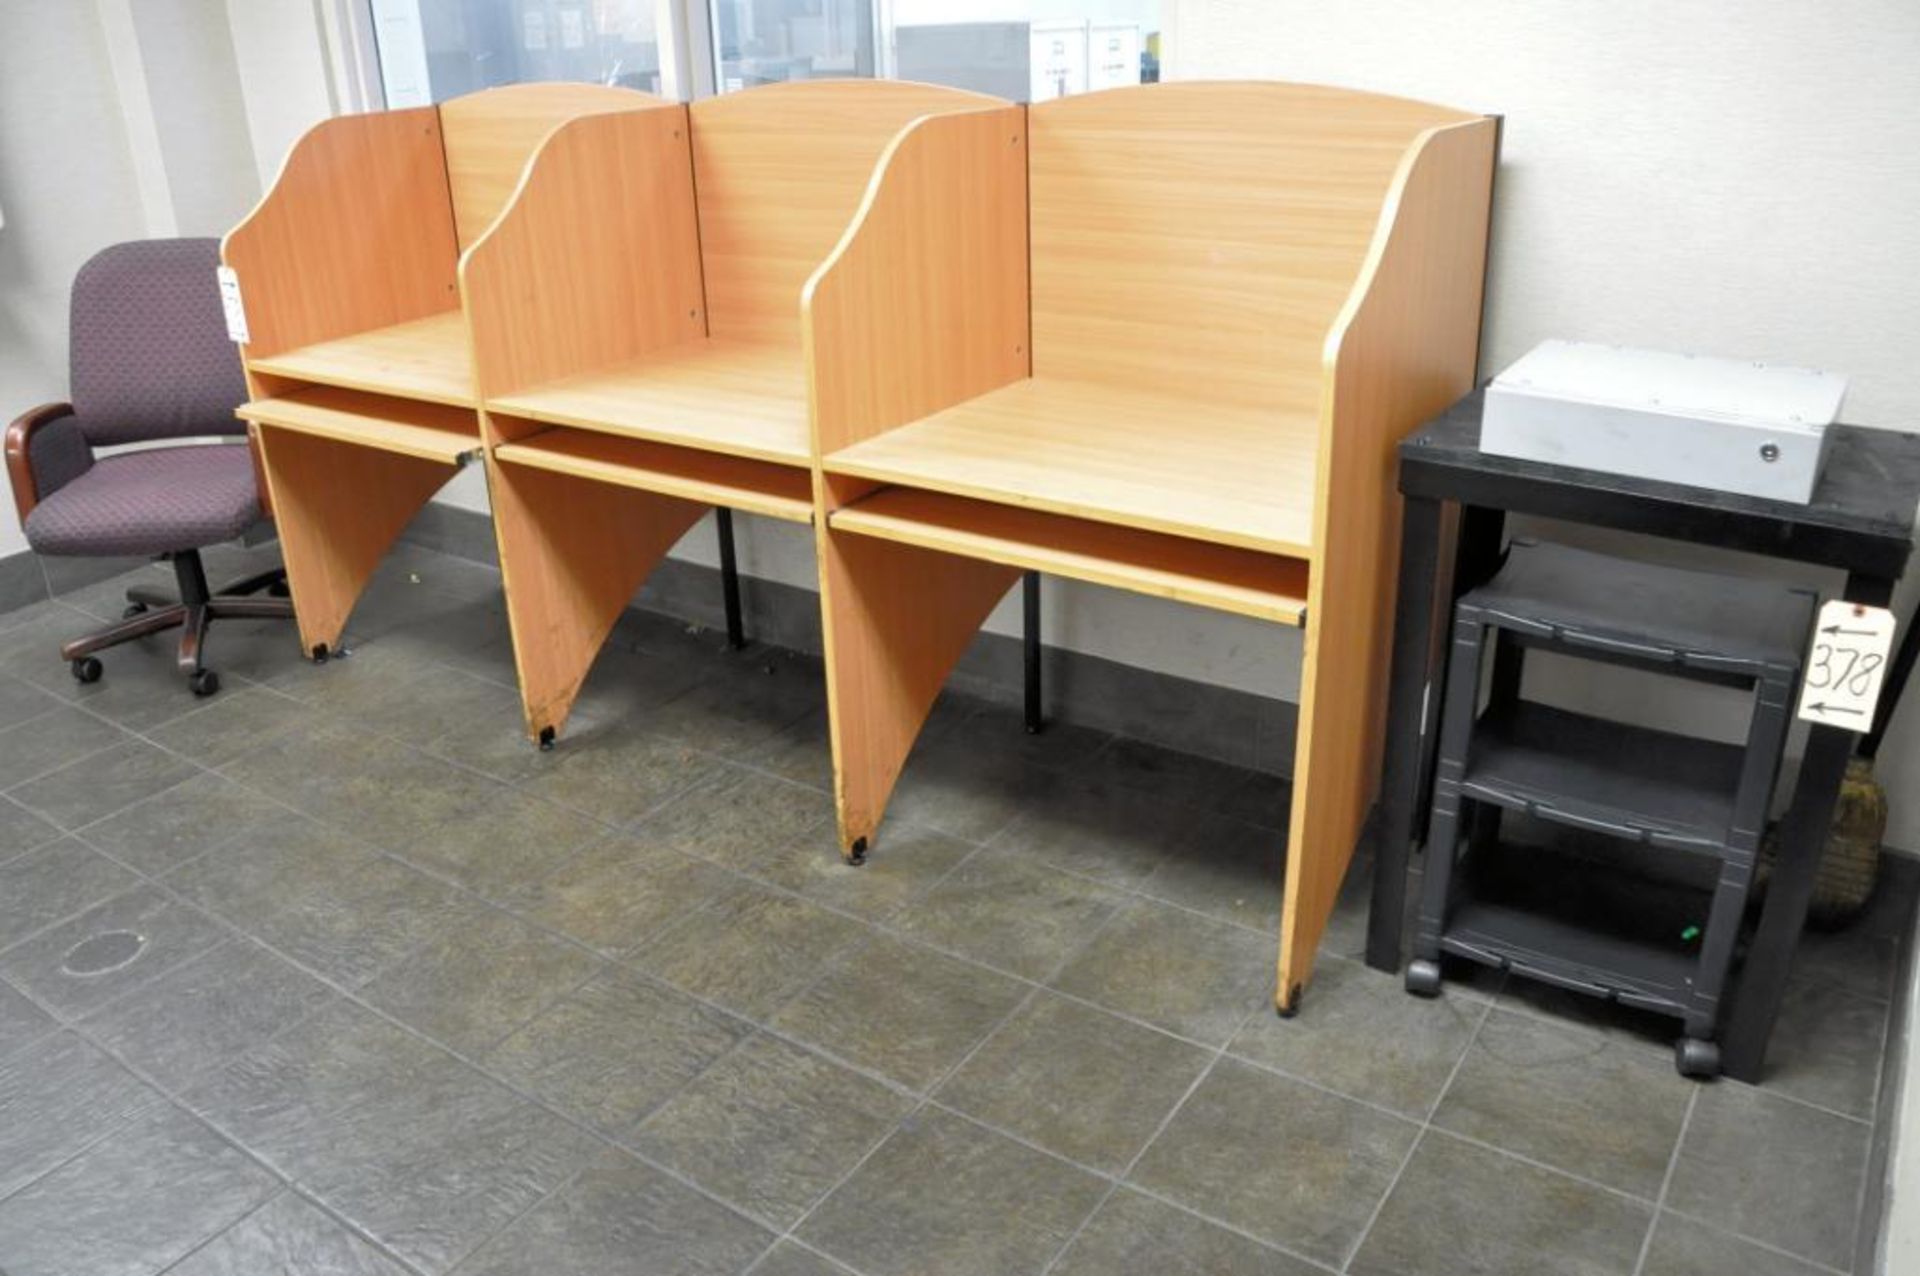 Lot-(1) 3-Station Computer Work System, (1) Chair and (2) Stands in (1) Room